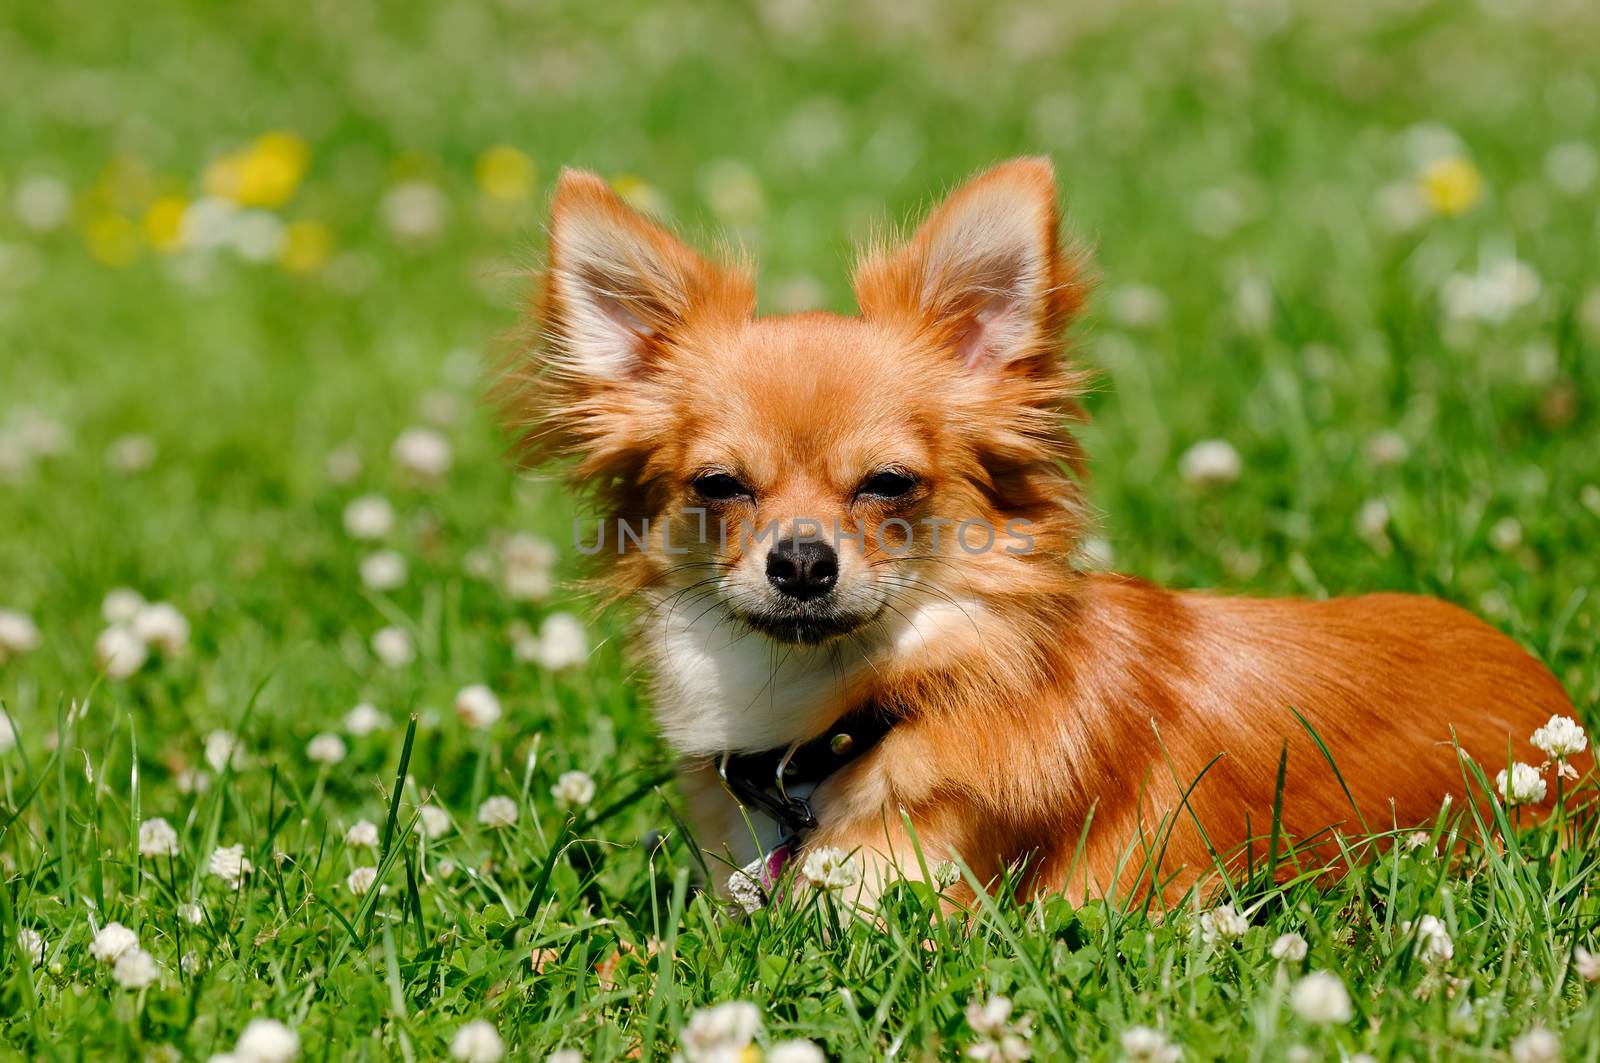 Chihuahua puppy dog resting on green grass